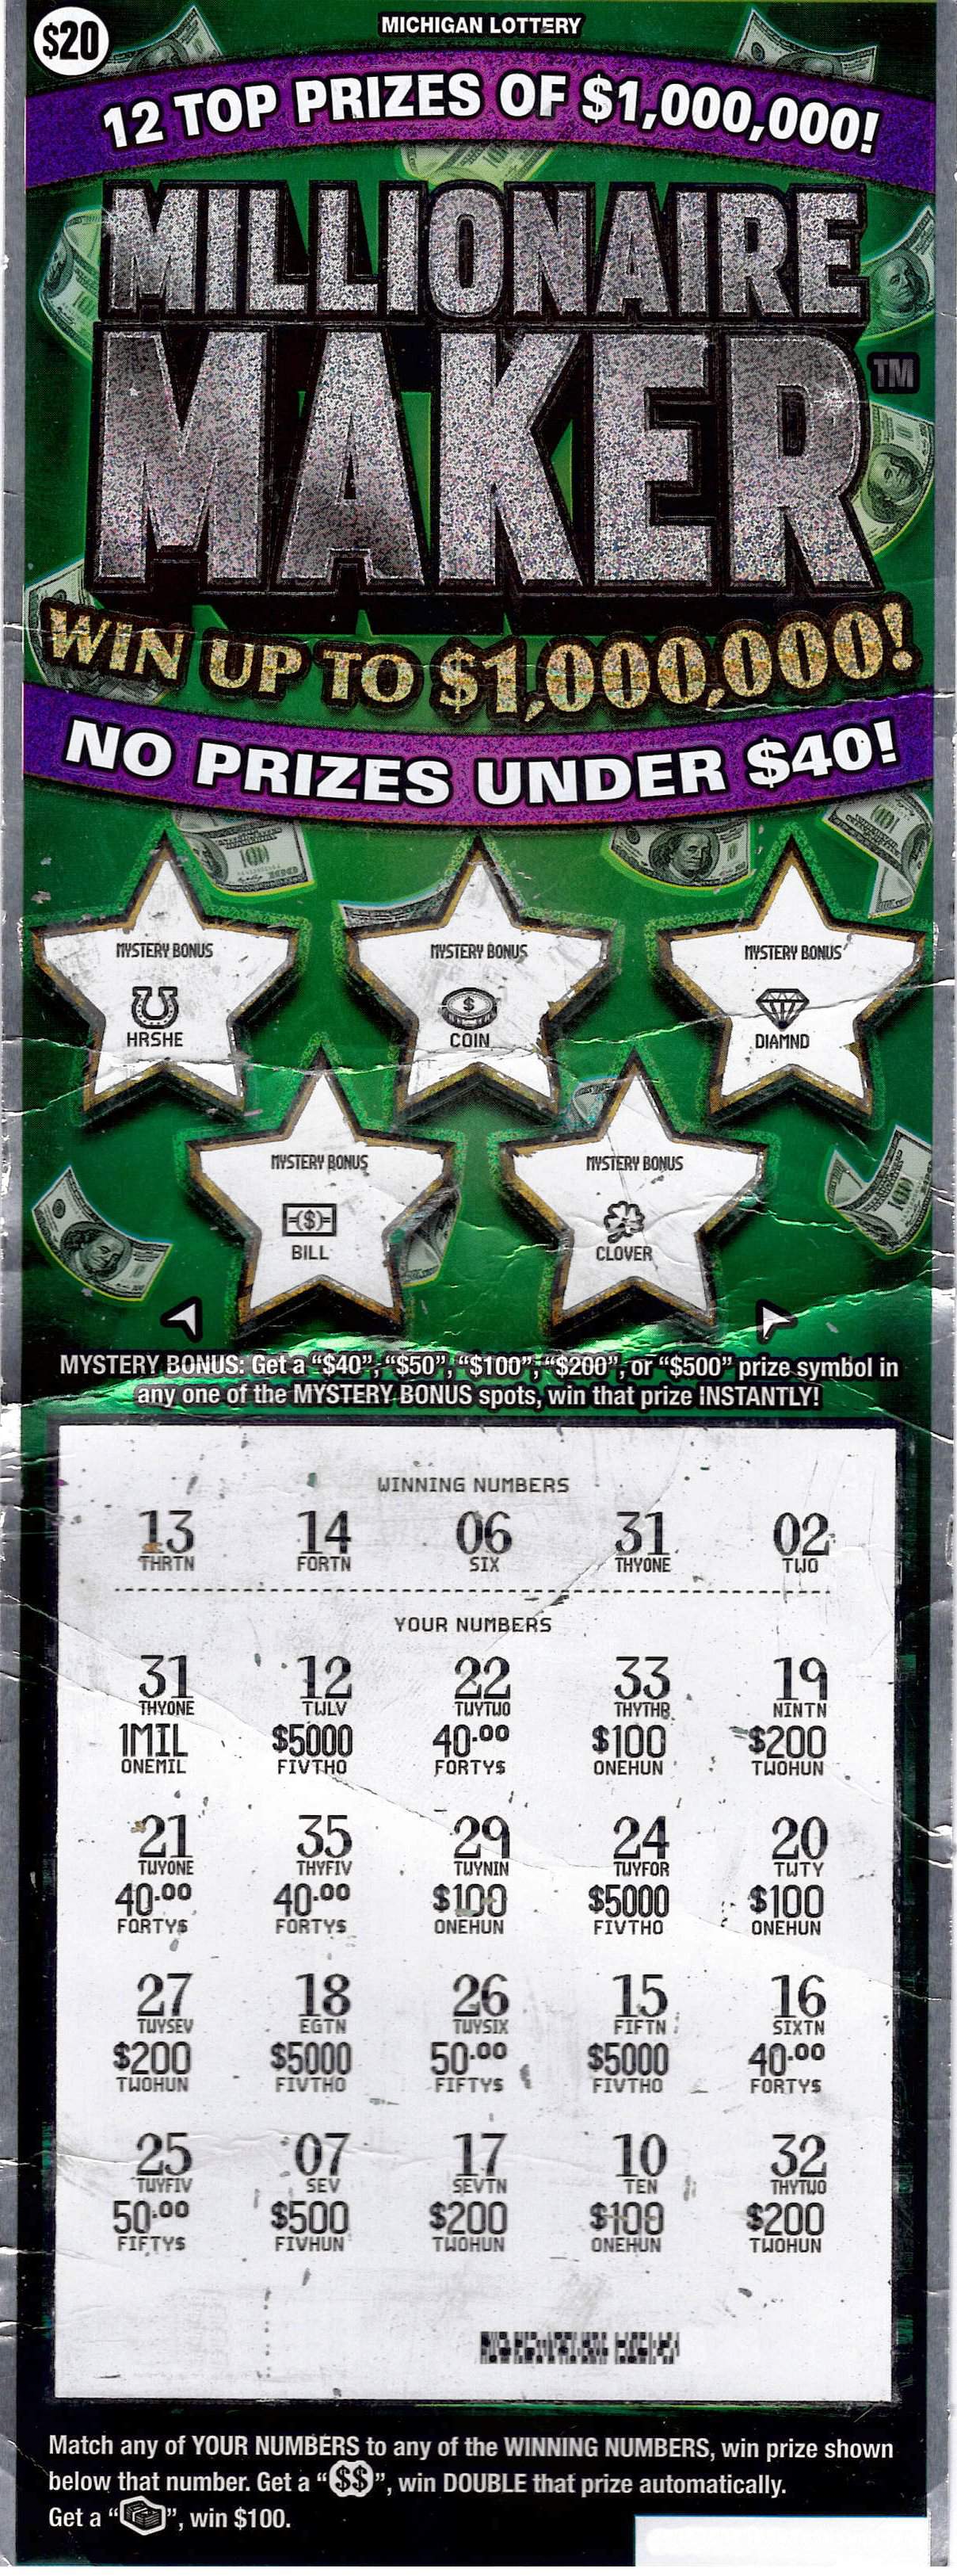 Michigan Lottery: 19-year-old man wins $1M on scratch off ticket